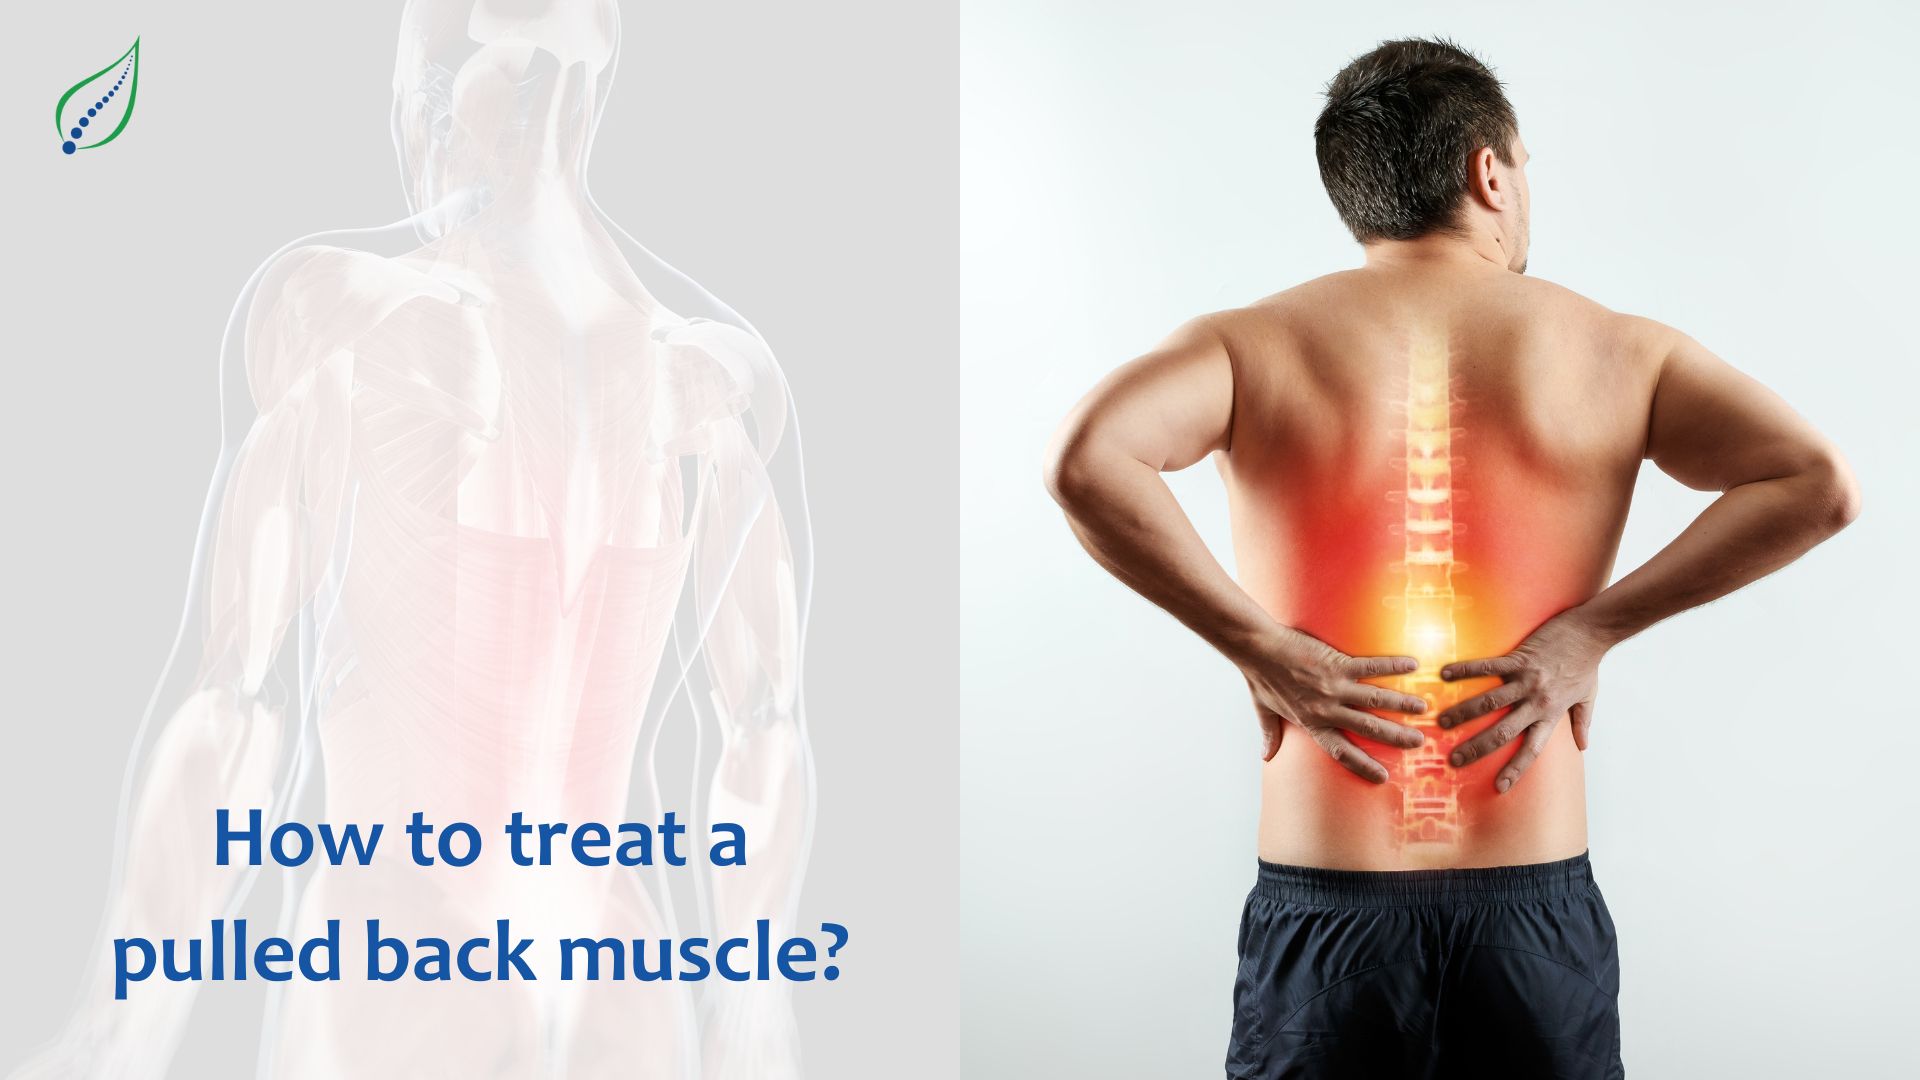 How to Treat a Pulled Back Muscle?